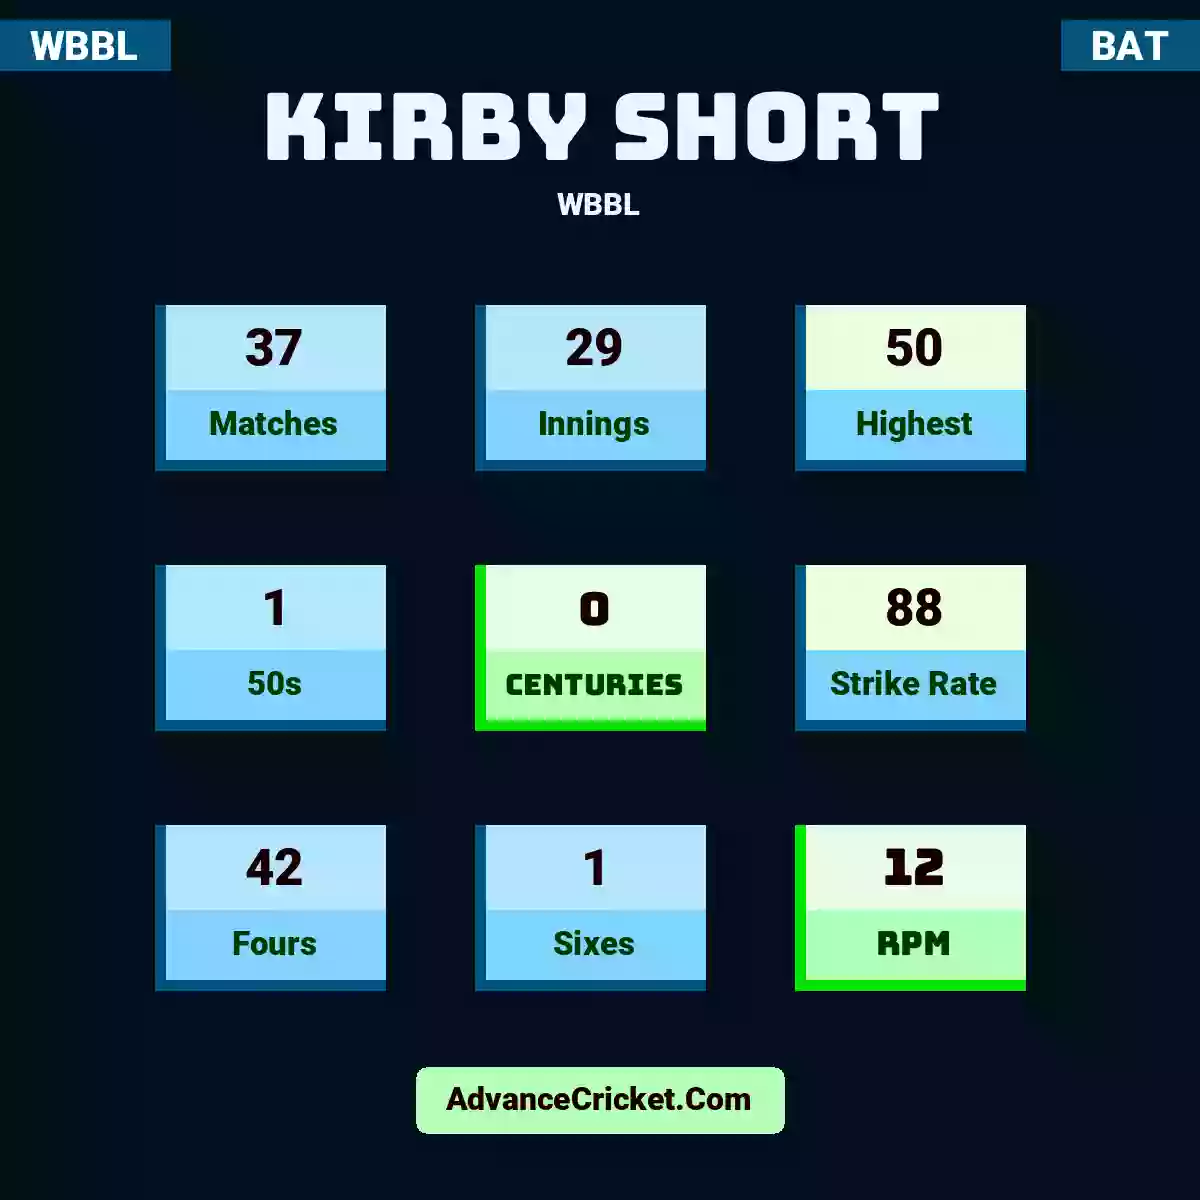 Kirby Short WBBL , Kirby Short played 37 matches, scored 50 runs as highest, 1 half-centuries, and 0 centuries, with a strike rate of 88. K.Short hit 42 fours and 1 sixes, with an RPM of 12.